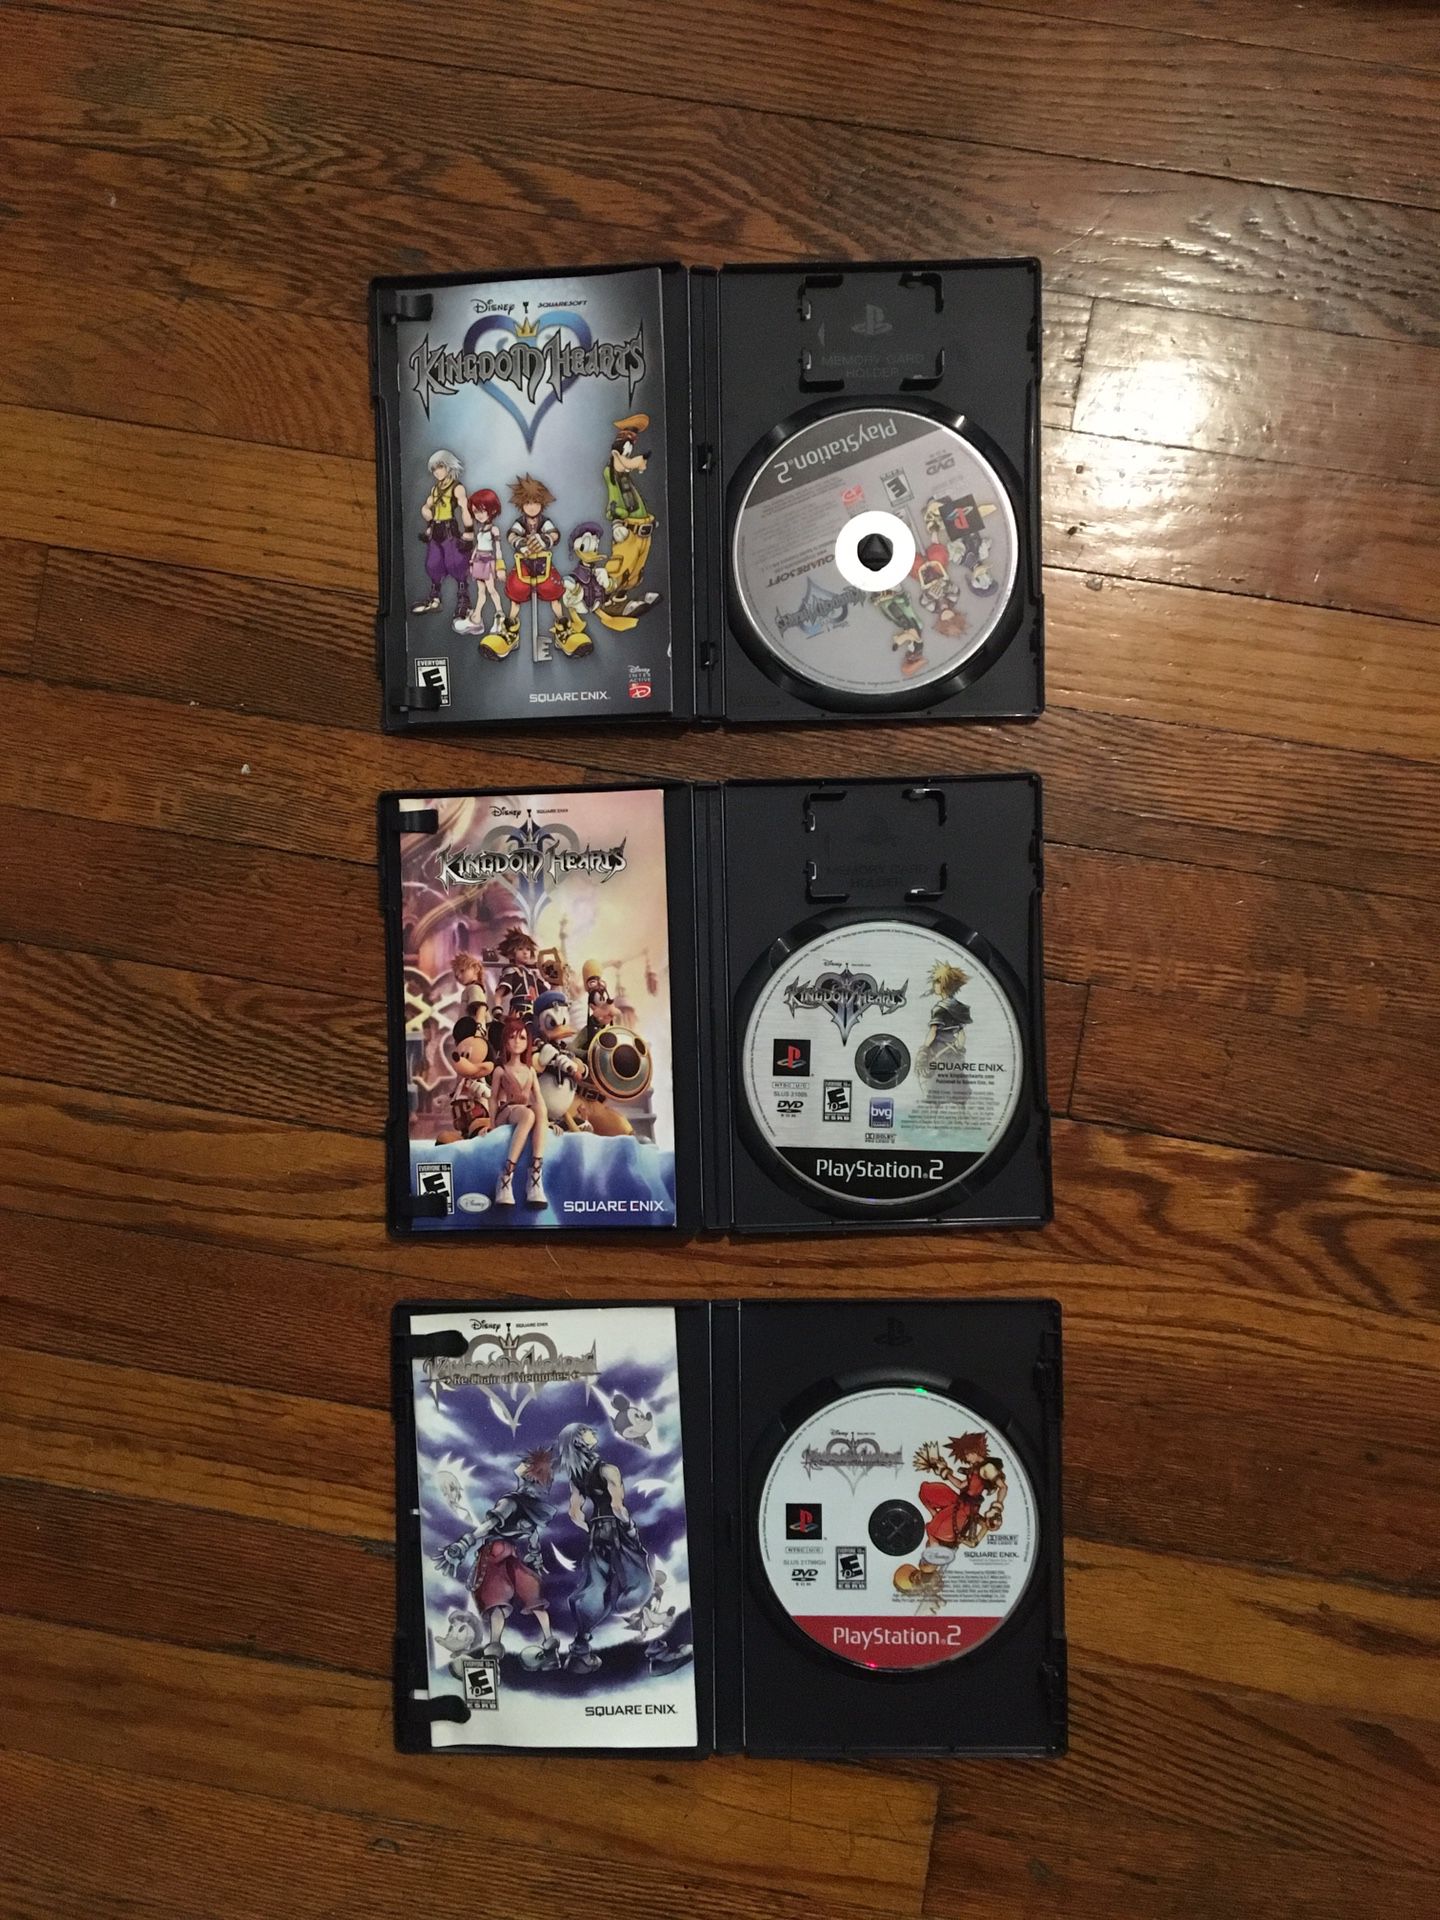 Sony PS2 with kingdom hearts collection. Including game manual